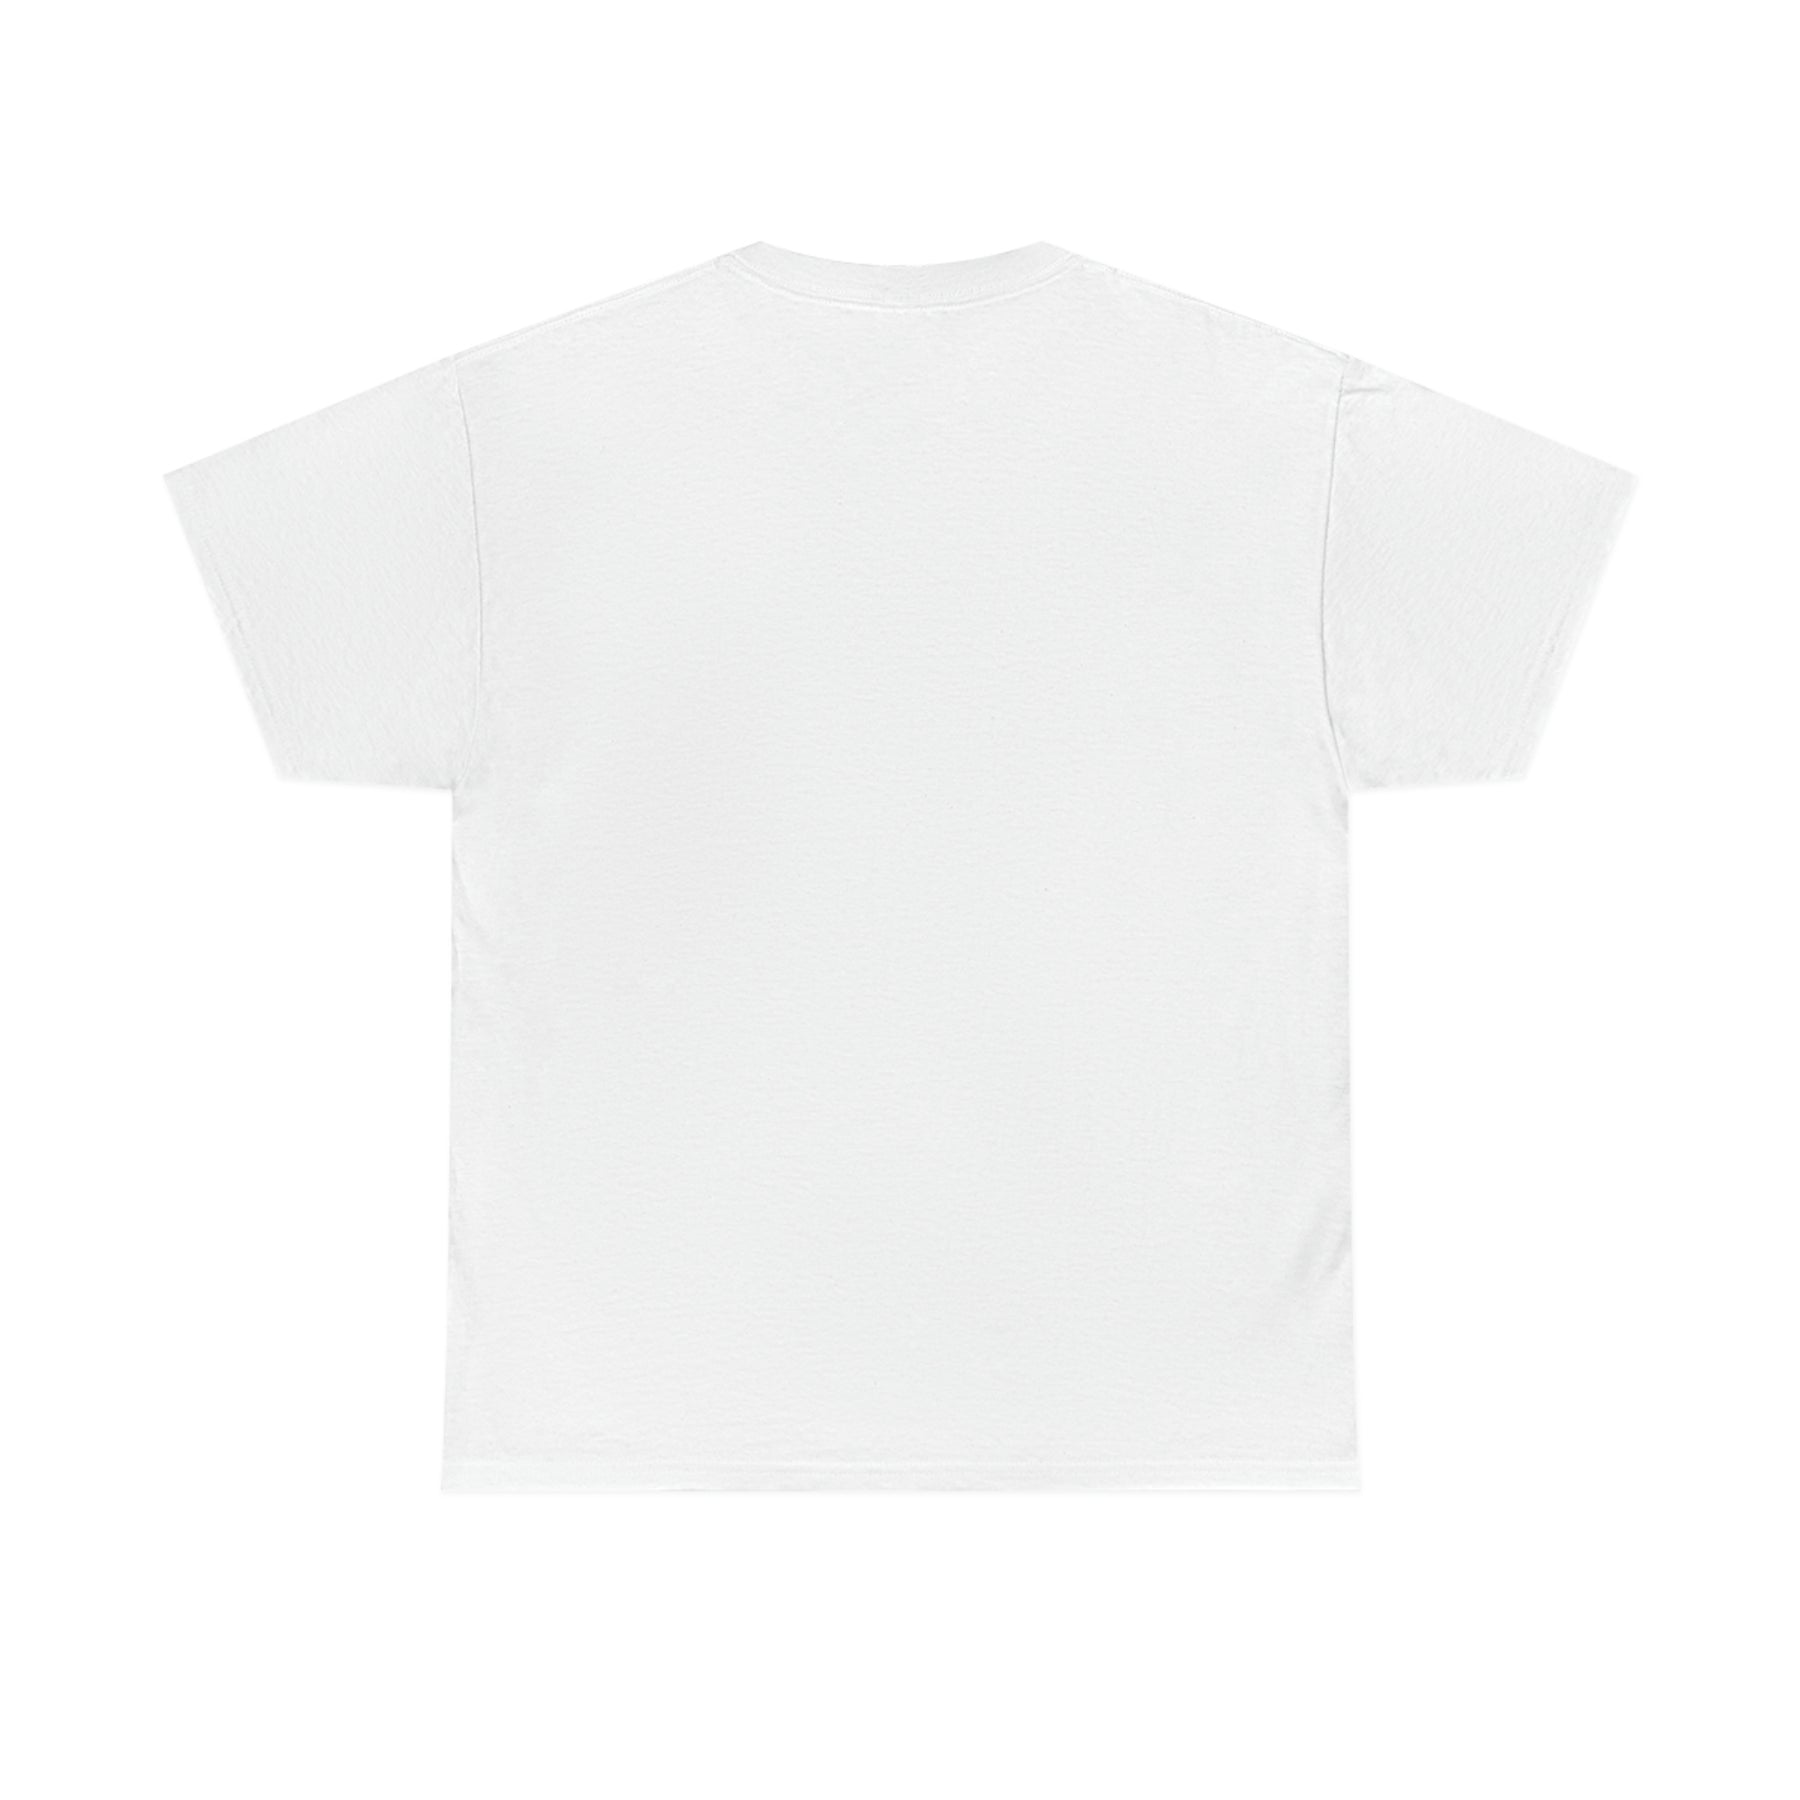 The Conscious Daughters Heavy Cotton Tee